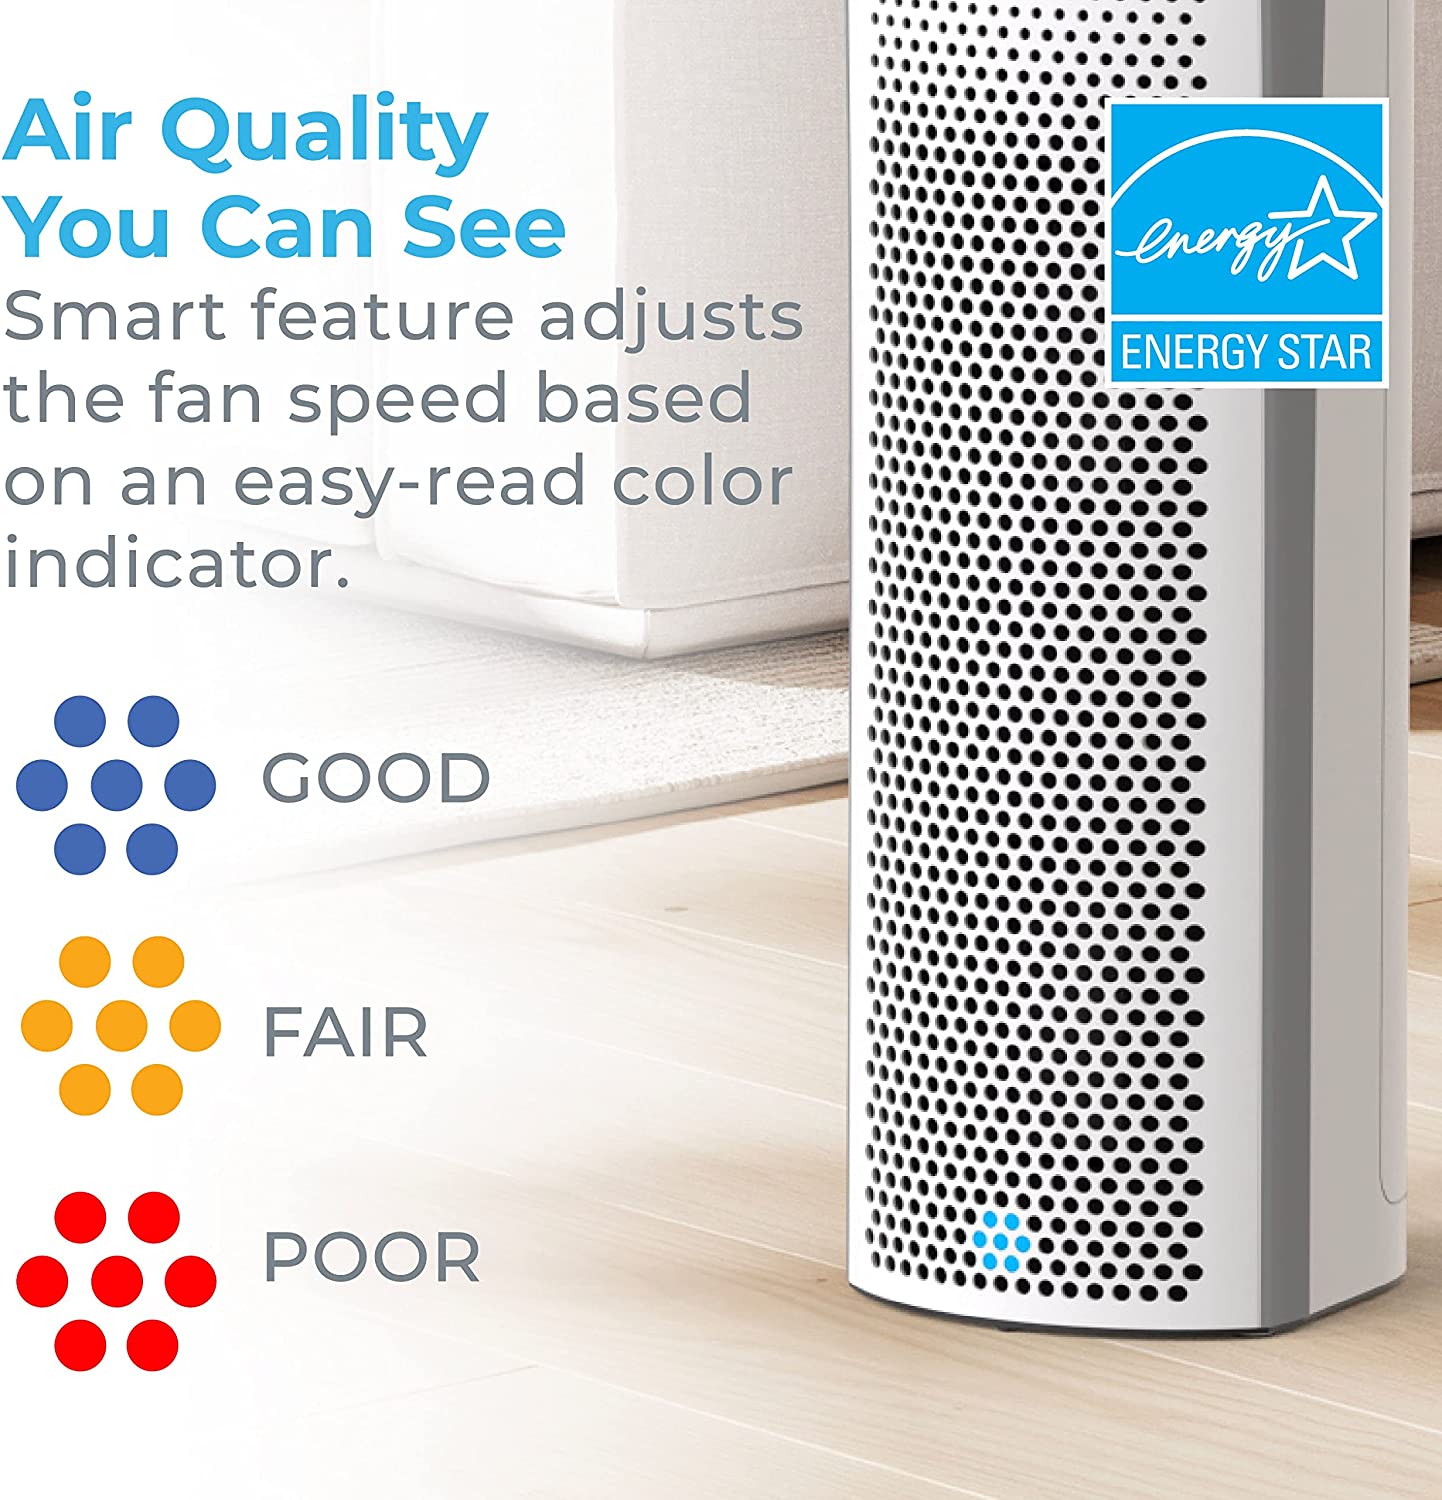 Pure Enrichment PureZone Elite True HEPA Large Room Tower Air Purifier with Air Quality Monitor, 4 Stage Filtration and UV-C Light, Helps Destroy Bacteria, Smoke, Pollen & Dust - White - Pro-Distributing